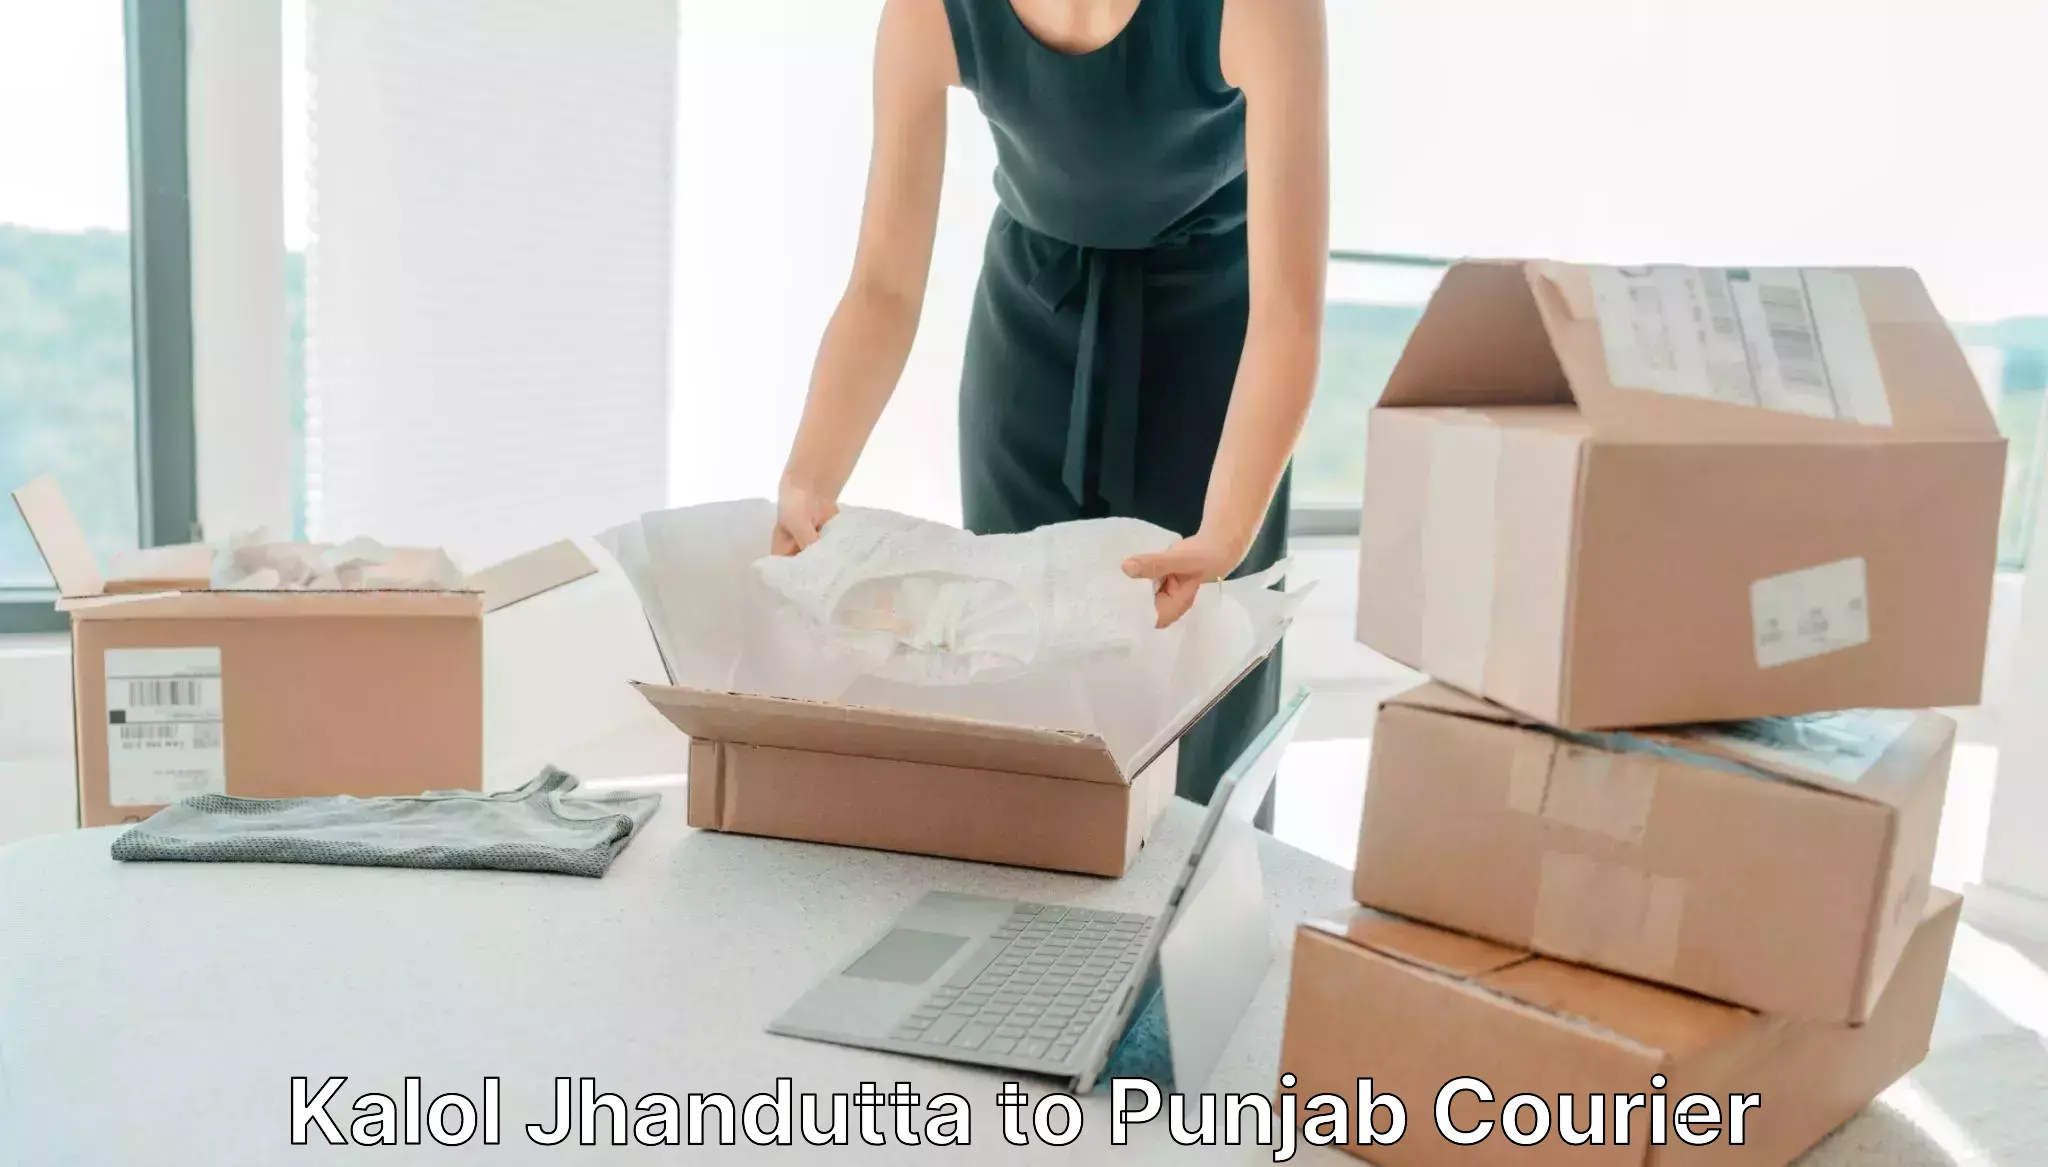 Expedited parcel delivery in Kalol Jhandutta to Ajnala